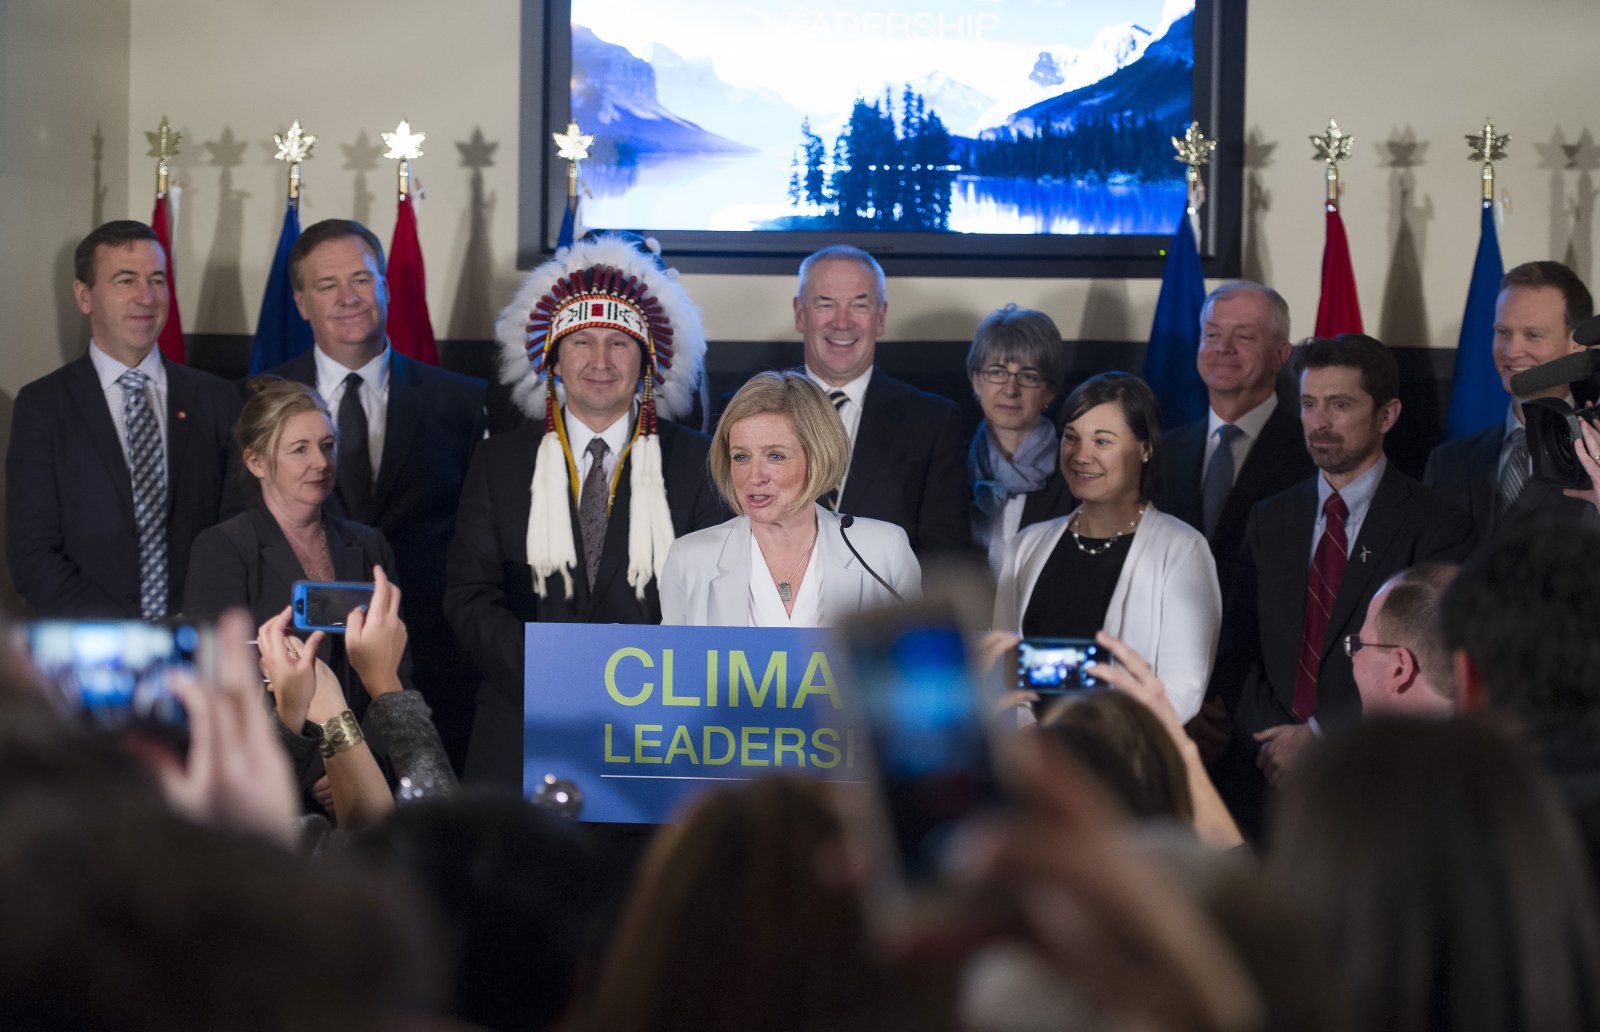 Alberta Premier Rachel Notley was flanked by Environment Minister Shannon Phillips (right) and oilsands industry leaders when she announced the province's climate leadership plan on Nov. 22, 2015 in Edmonton. Photo from the Government of Alberta